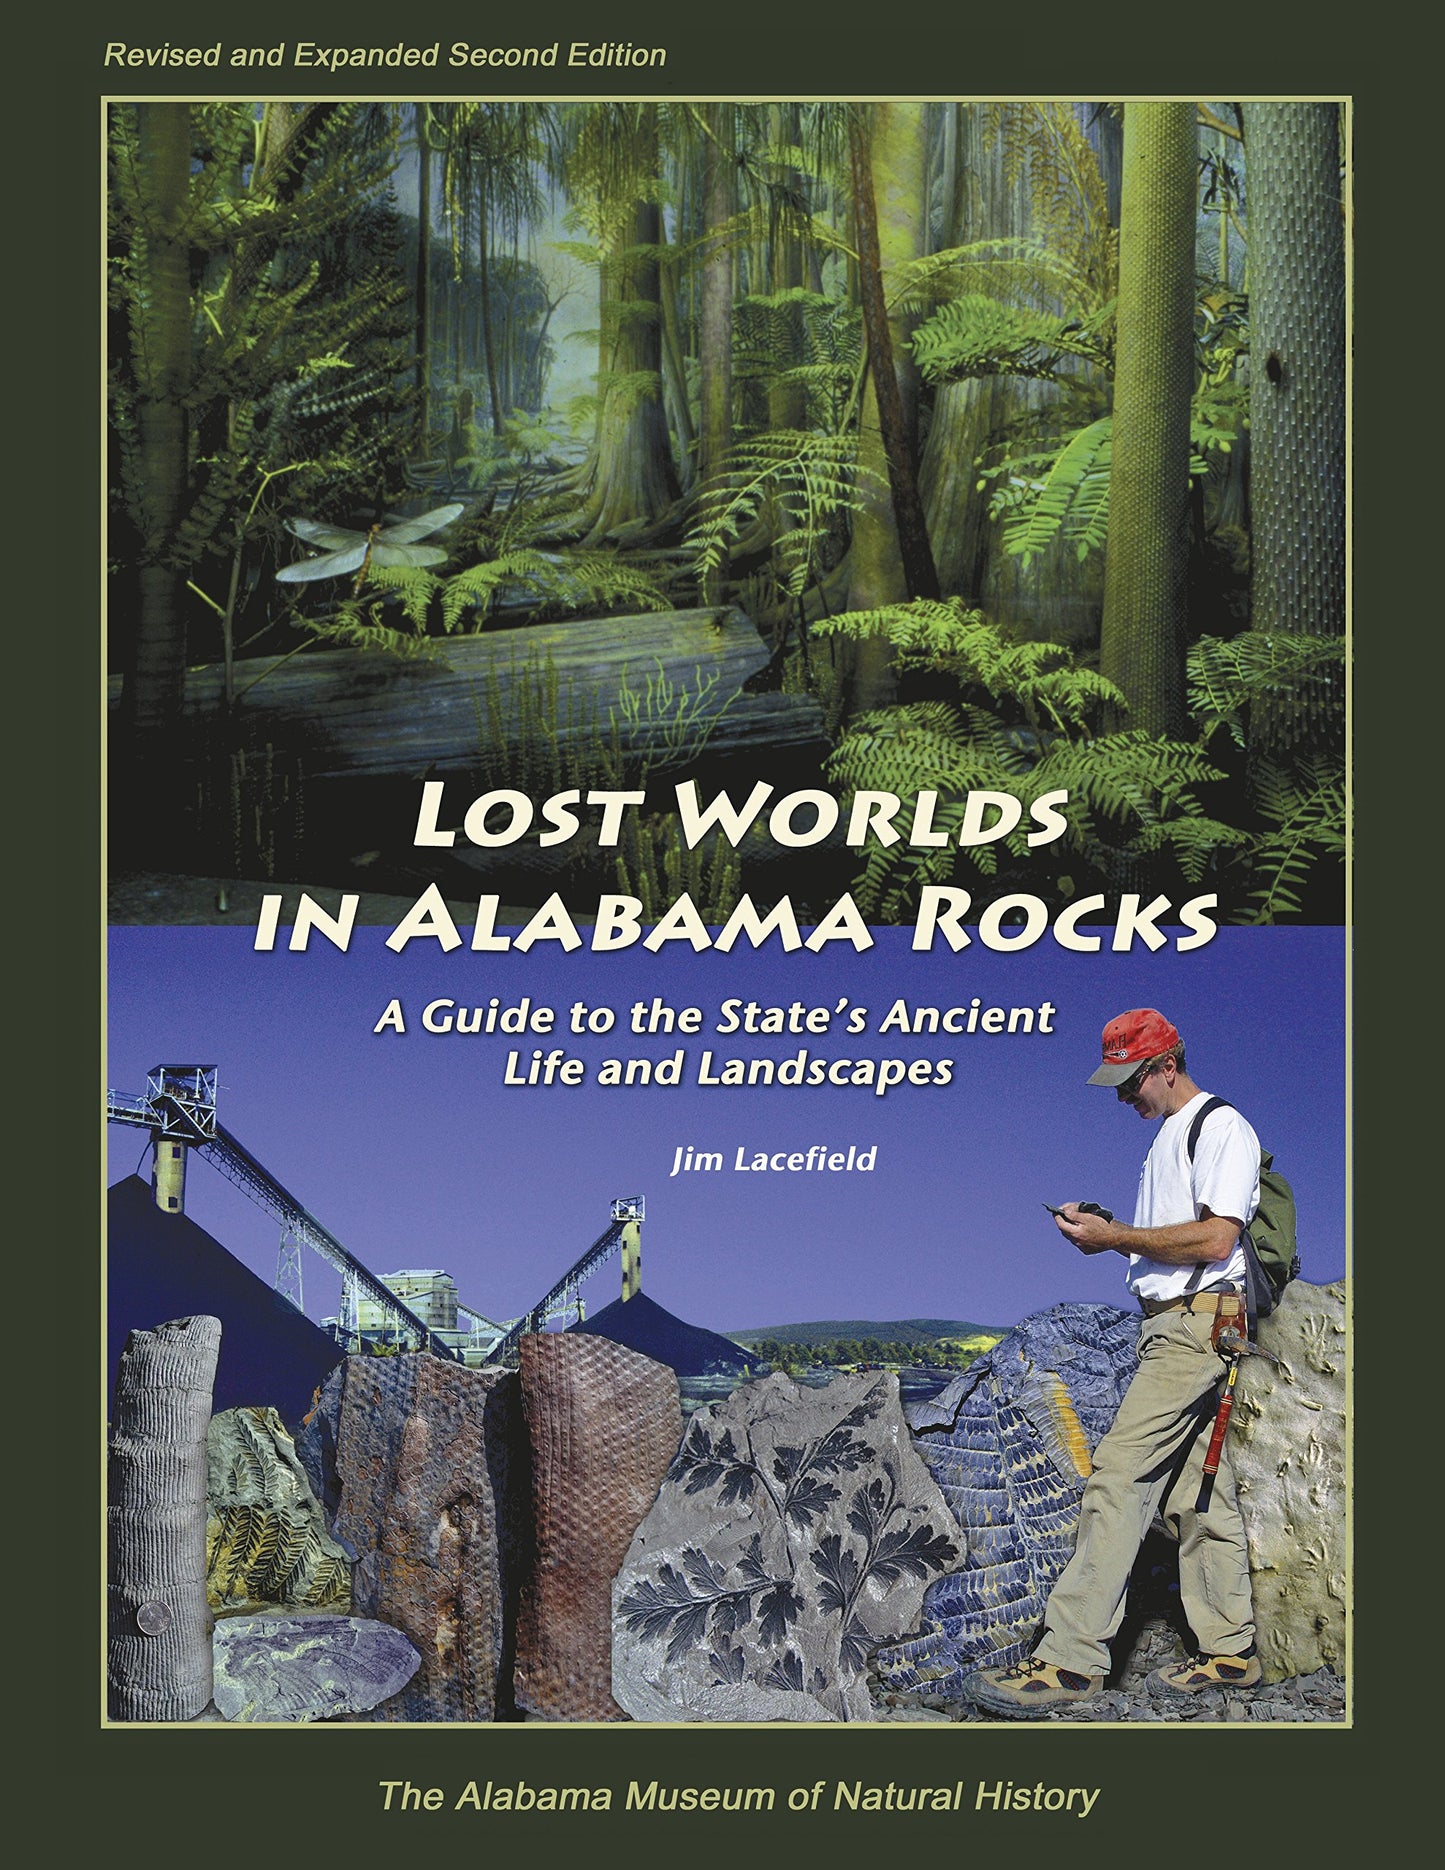 Lost Worlds in Alabama Rocks: A Guide to the State's Ancient Life by Jim Lacefield